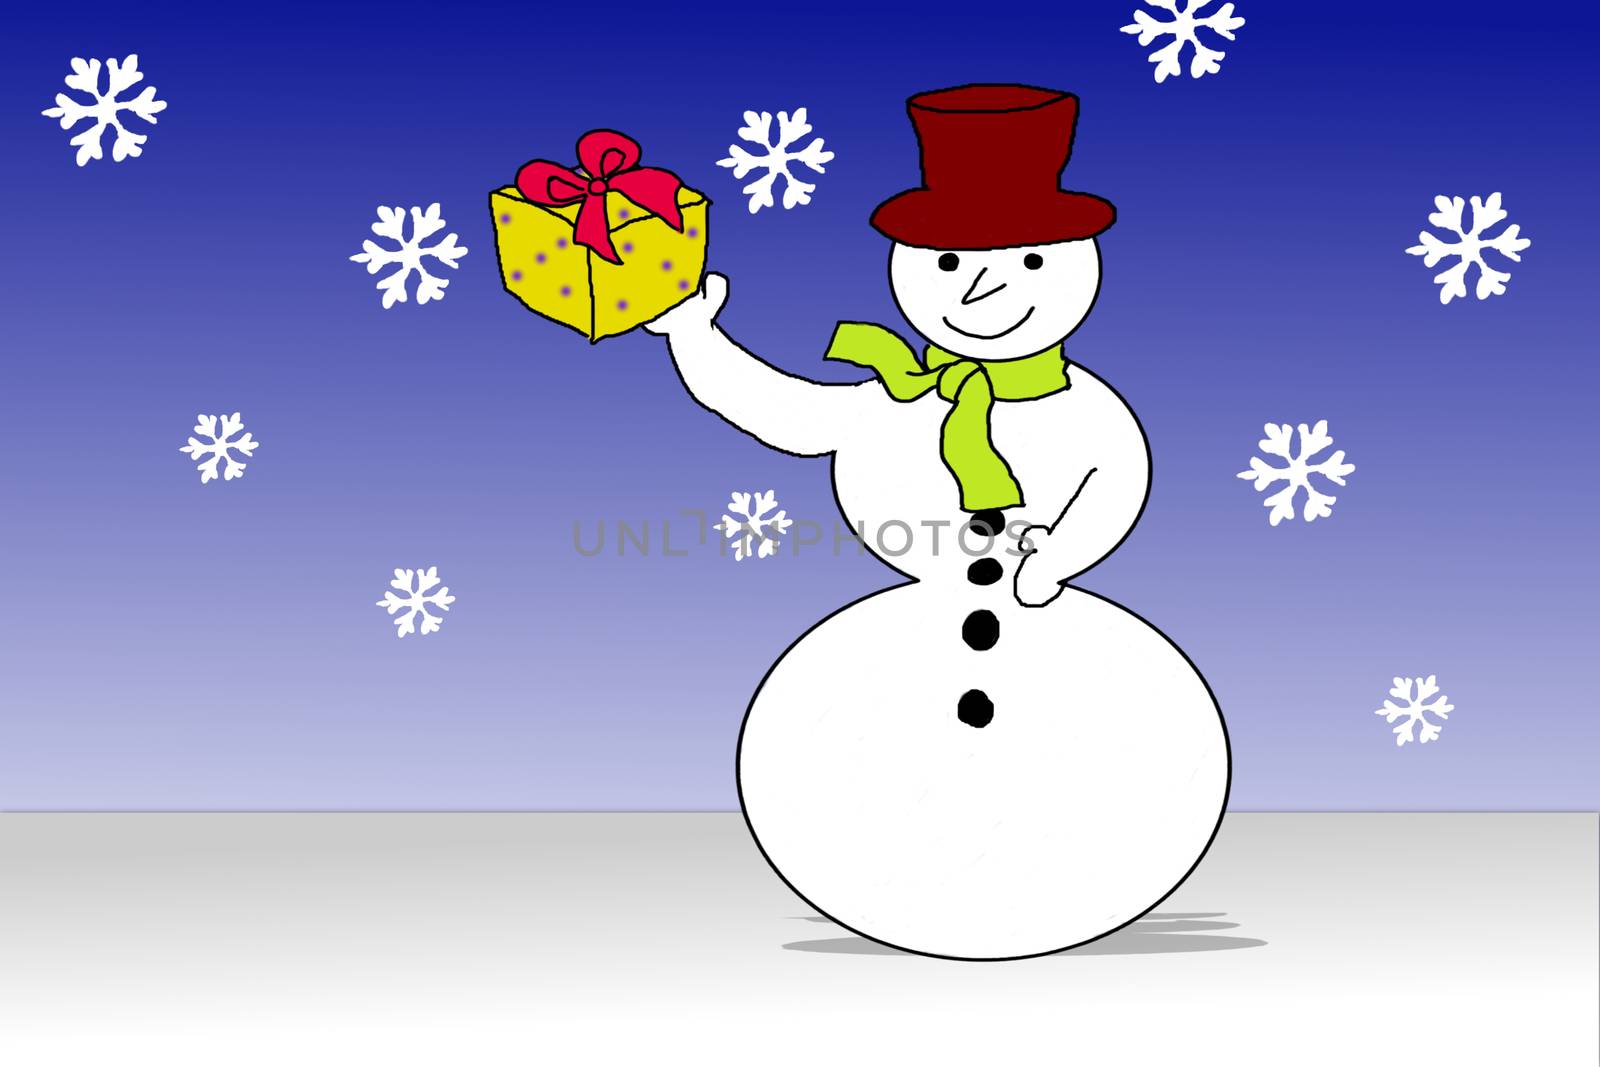 Santas snowman with Christmas gift by gwolters